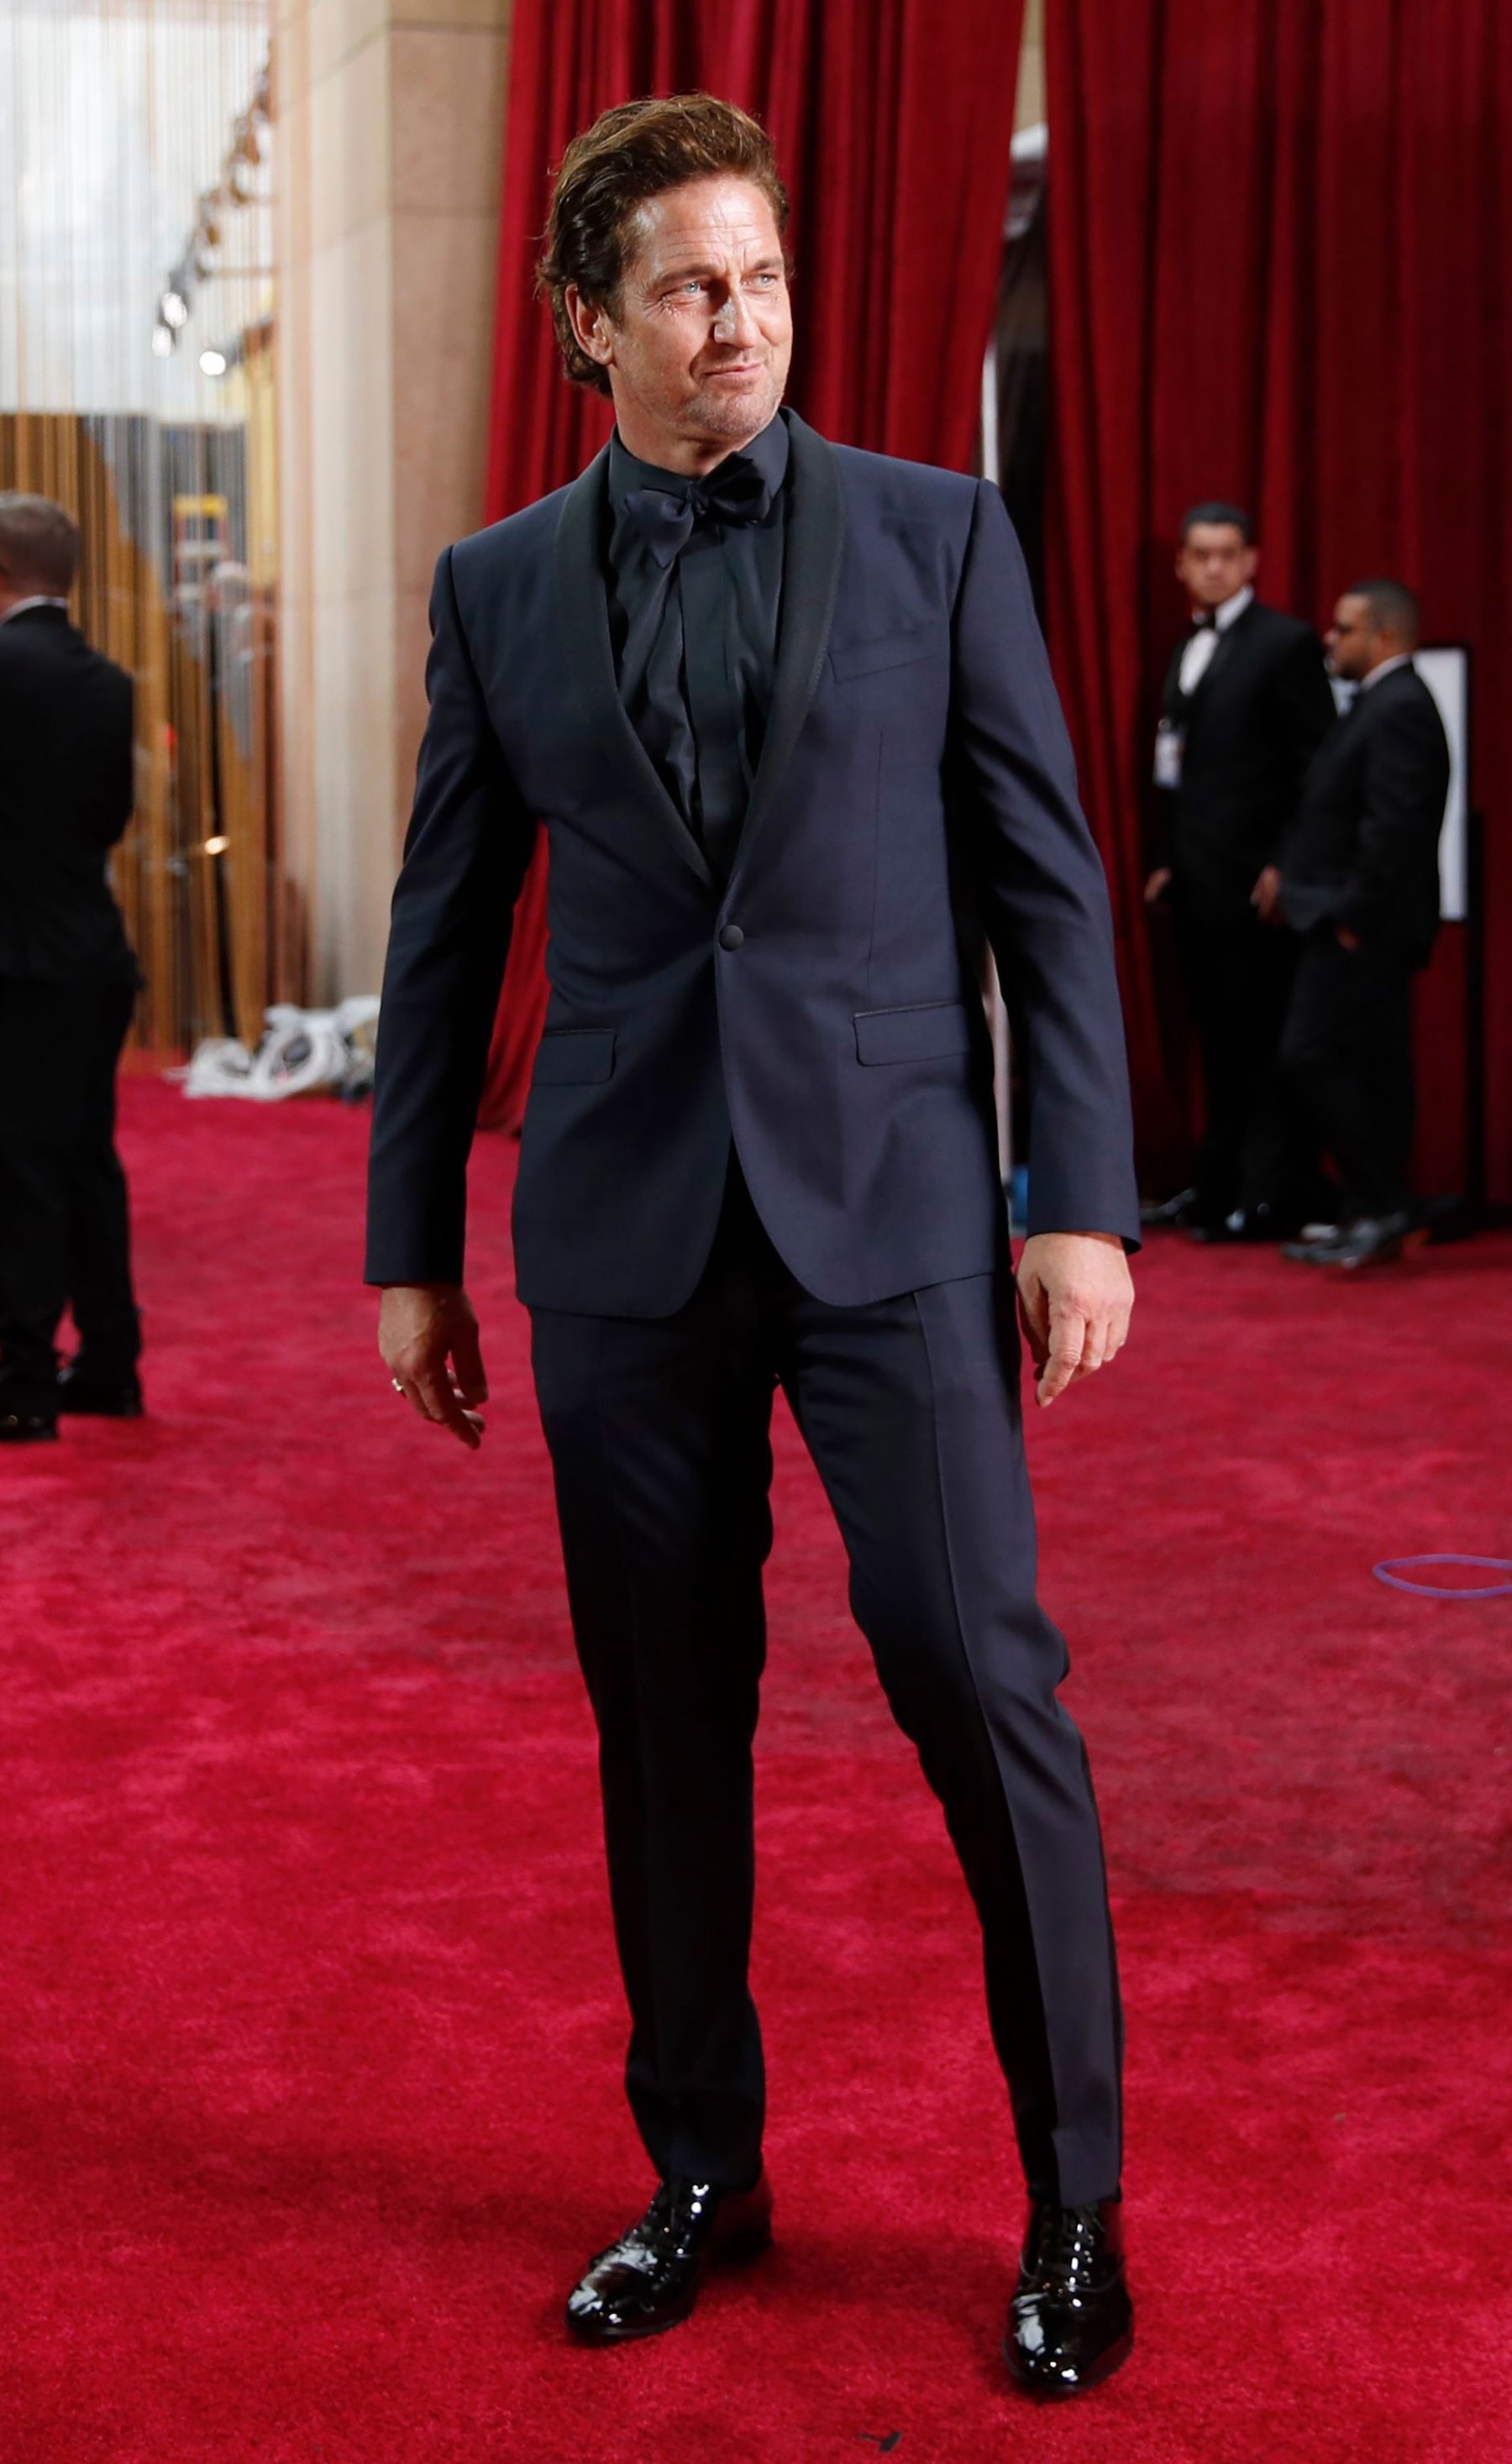 Oscars 2020 Red Carpet Fashion Hot Men in Suits, Tuxes